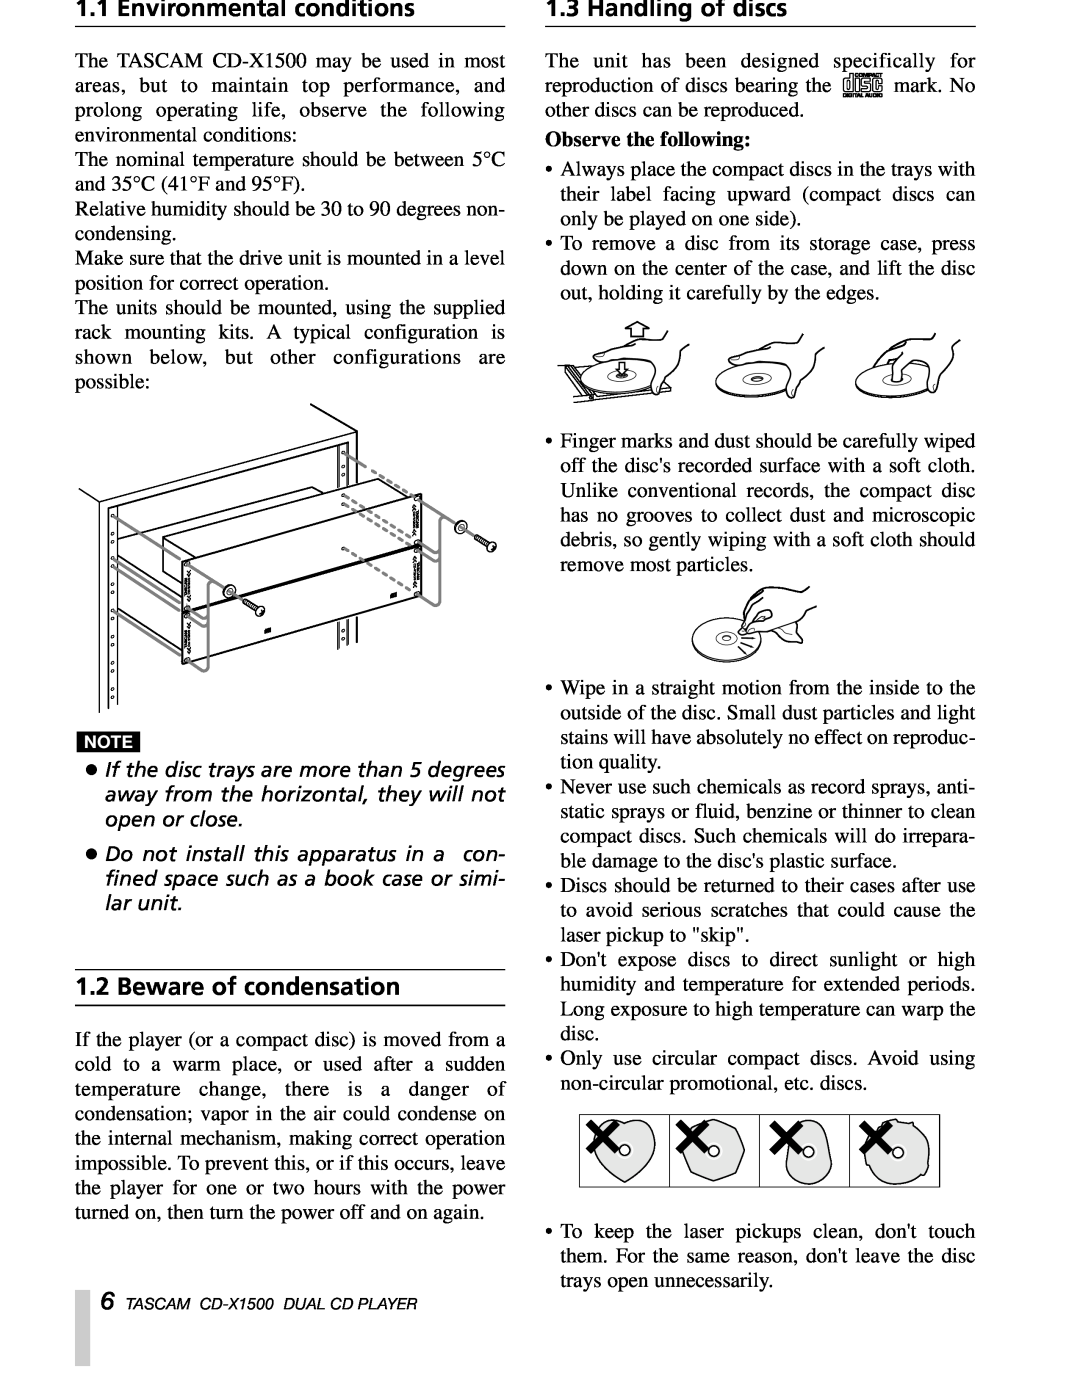 Sony CD-X1500 owner manual Environmental conditions, Beware of condensation, Handling of discs, Observe the following 